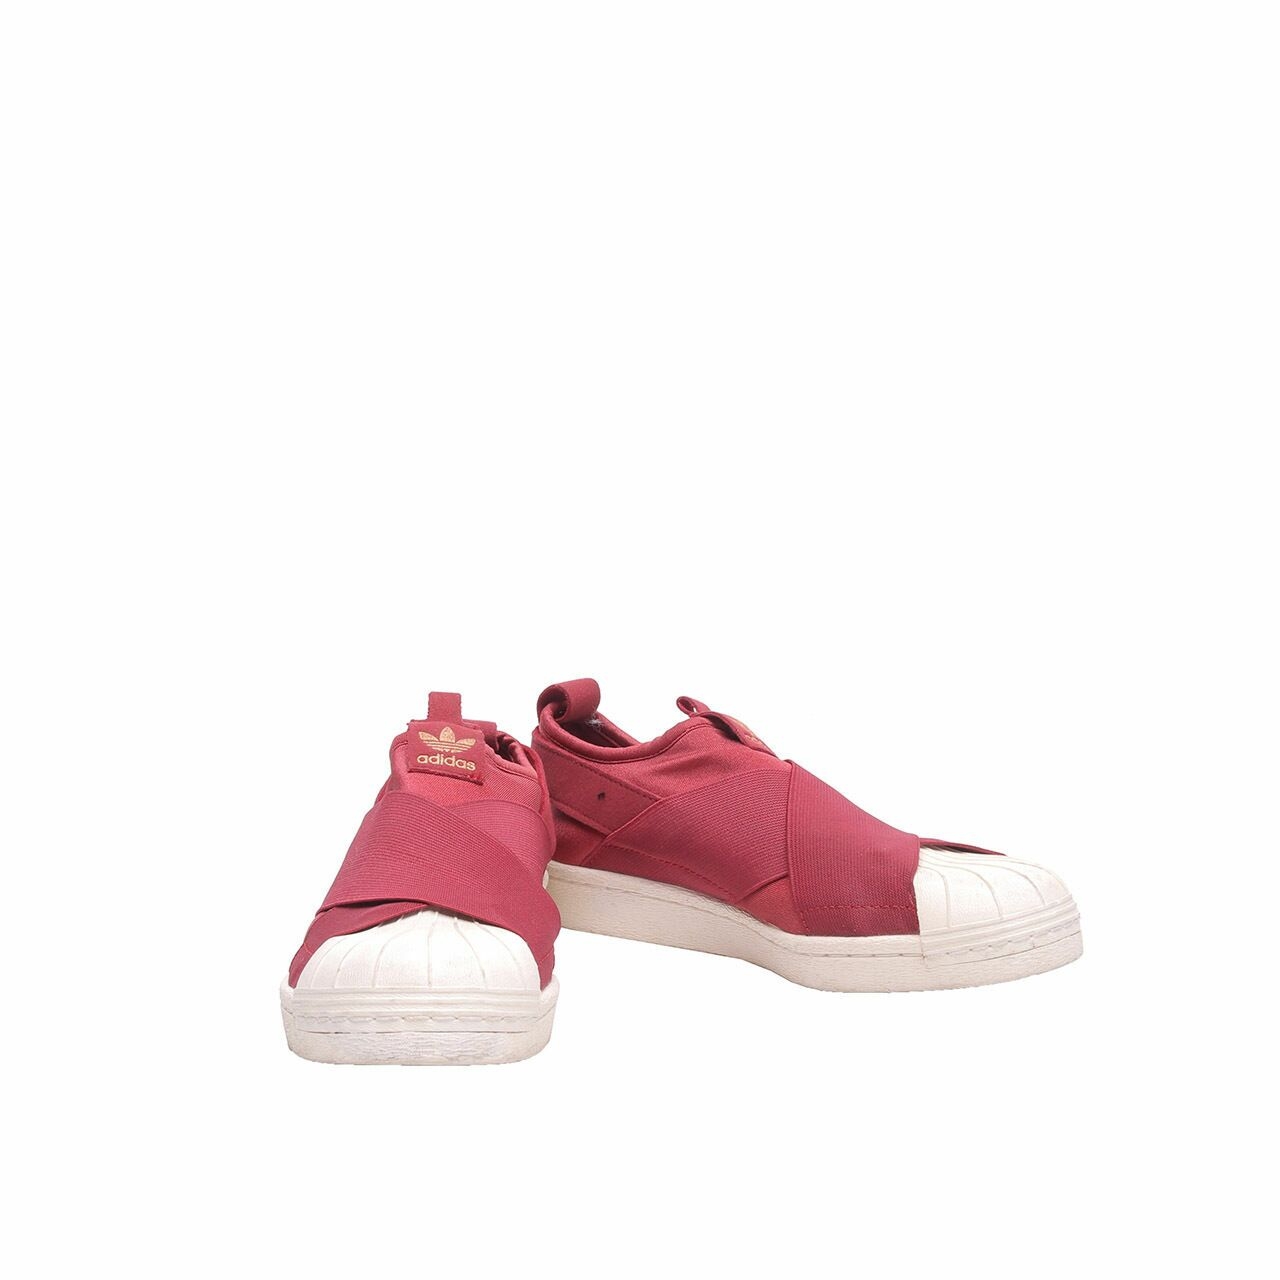 Adidas Red Slip On Sneakers